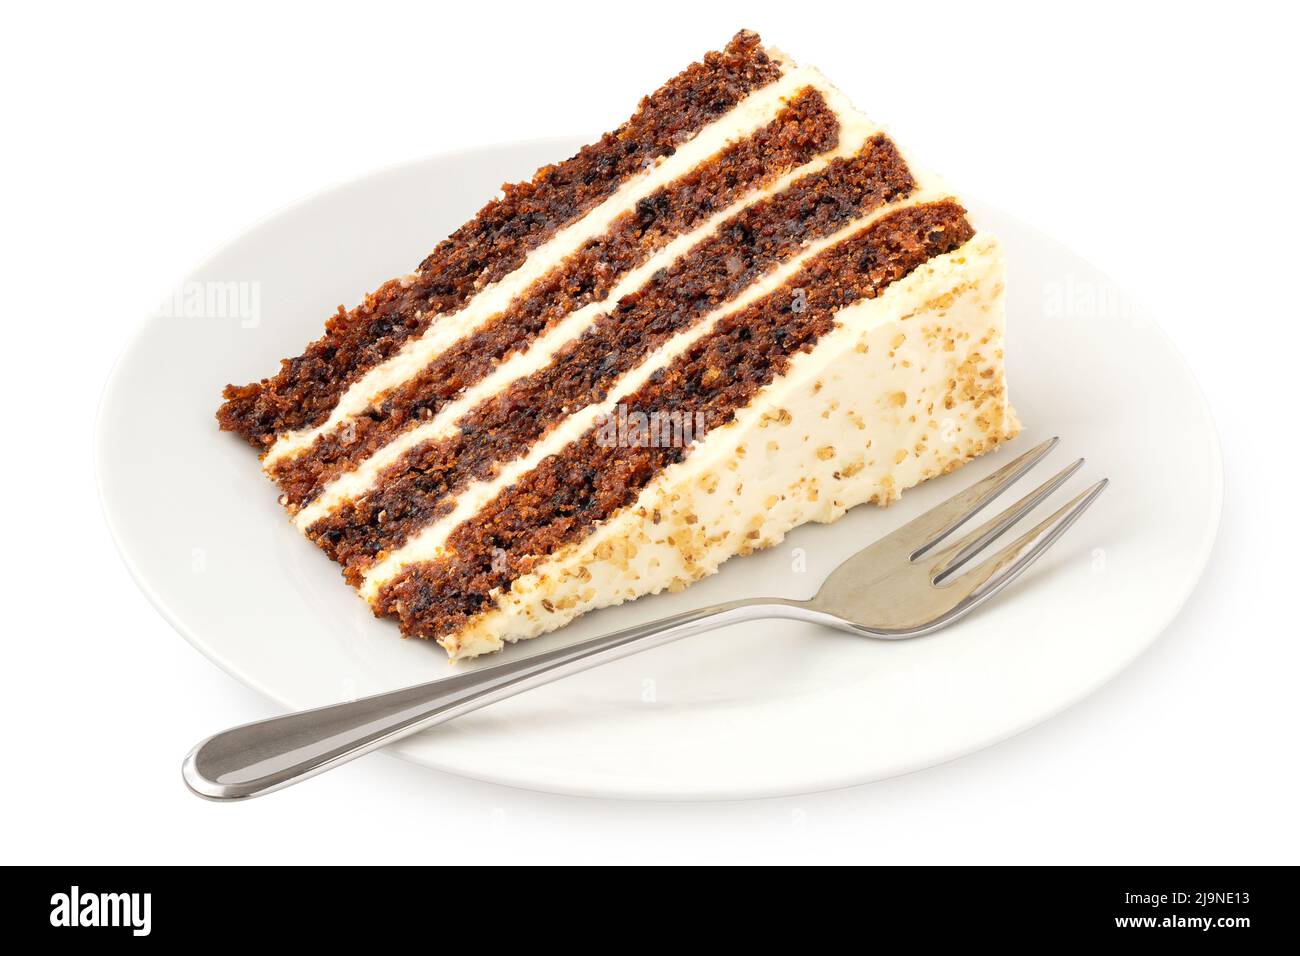 Slice of carrot cake with cream cheese filling and frosting on white plate with fork isolated on white. Stock Photo